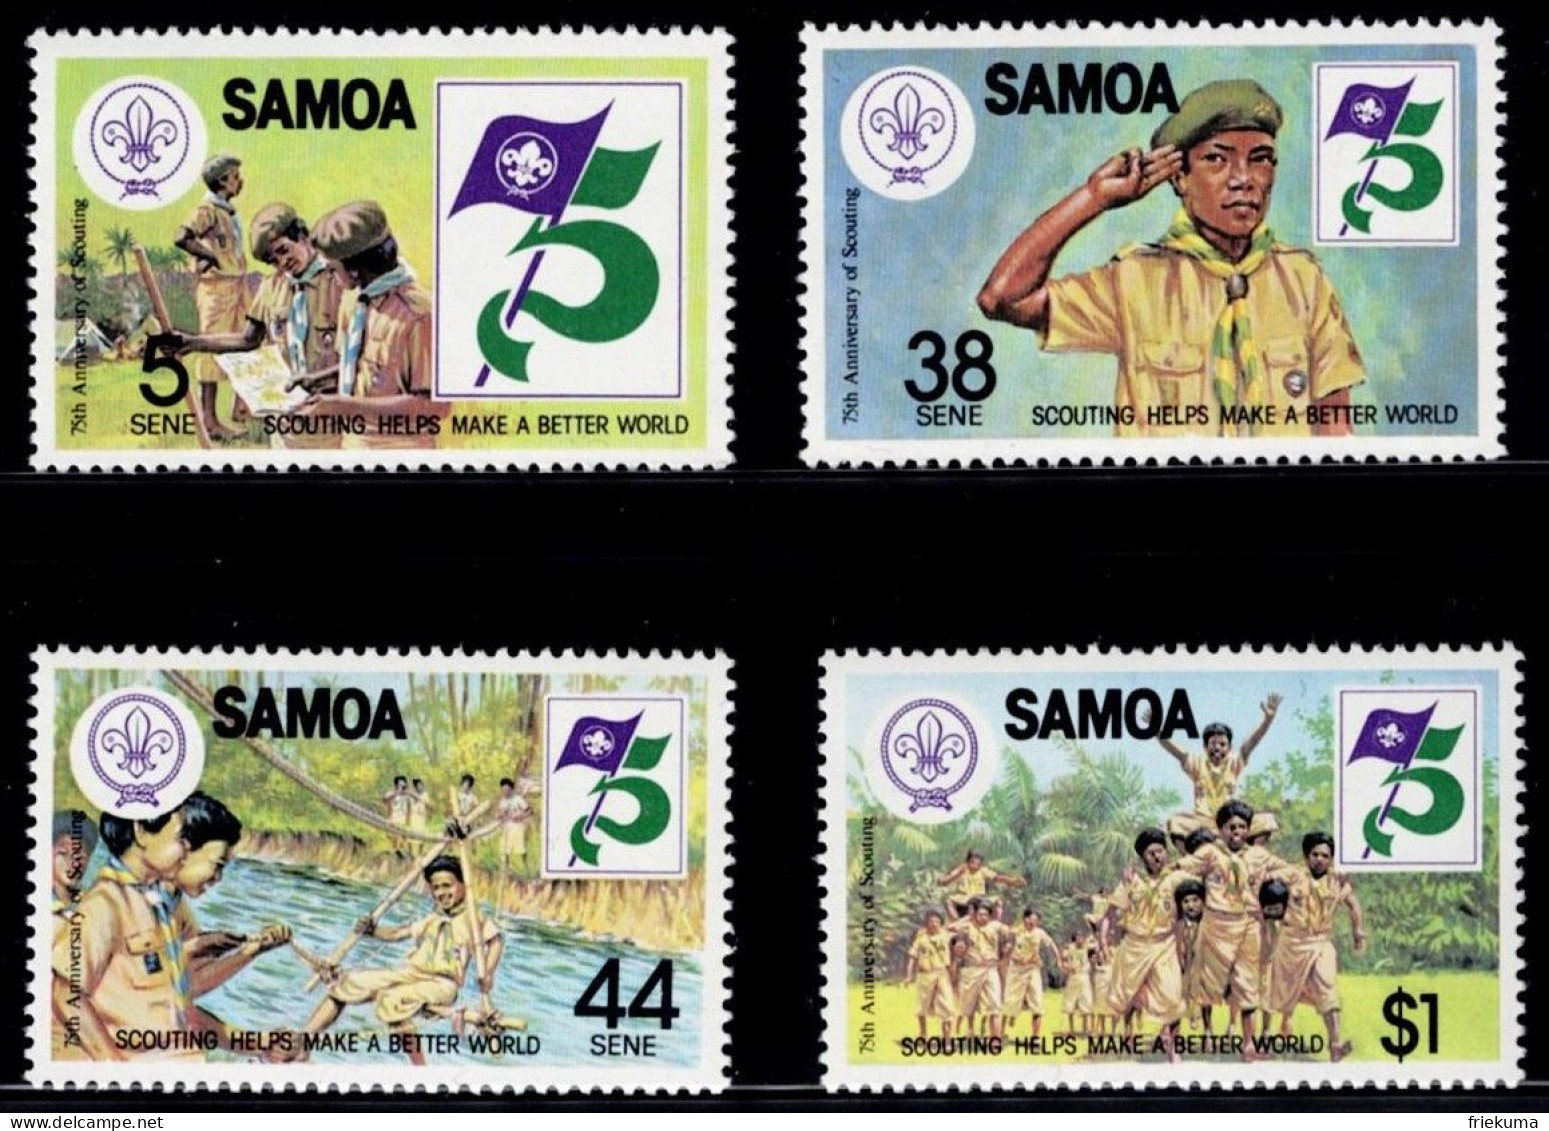 Samoa 1982, 75 Years Of The Scout Movement: Scouts With A Map, Scout Greeting, Rope Bridge, Scout Group, MiNr. 481-484 - Unused Stamps